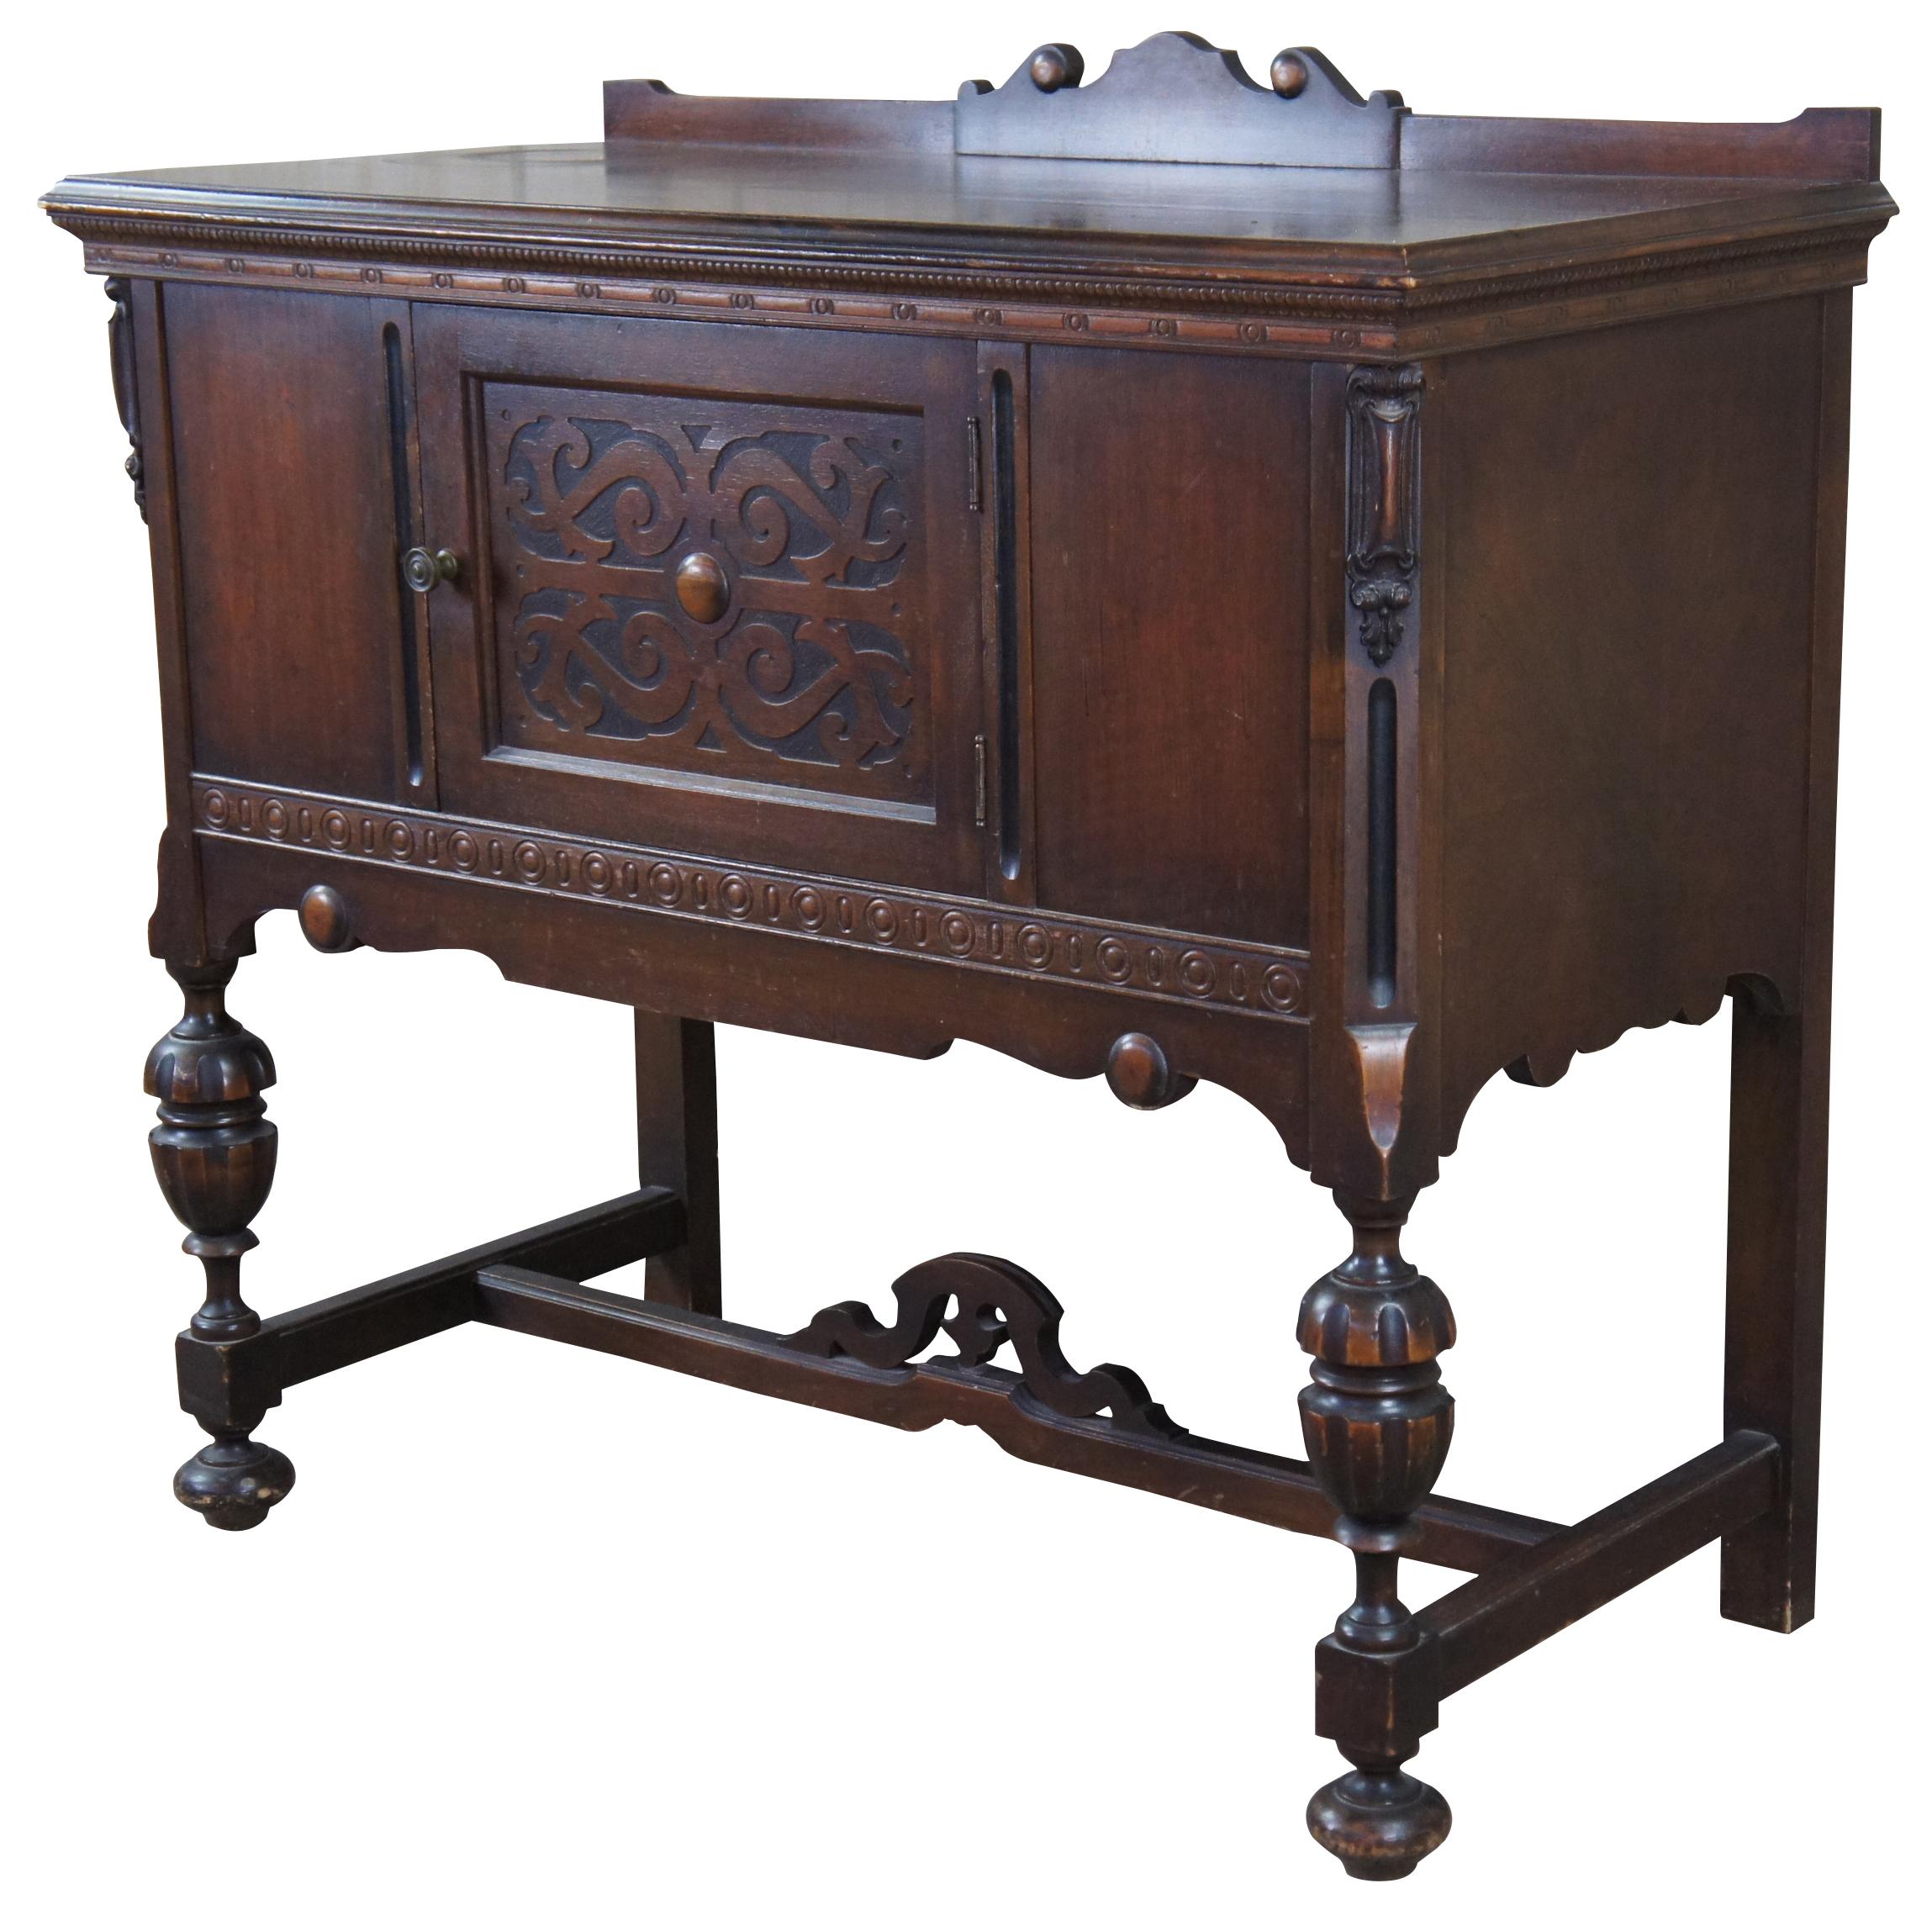 An early 20th century Jacobean Revival Server. Features a rectangular form with backsplash over baluster legs connected by an H stretcher and bun feet. Includes a large central storage area with scrolled door, beaded trim, medallions and gadrooning.